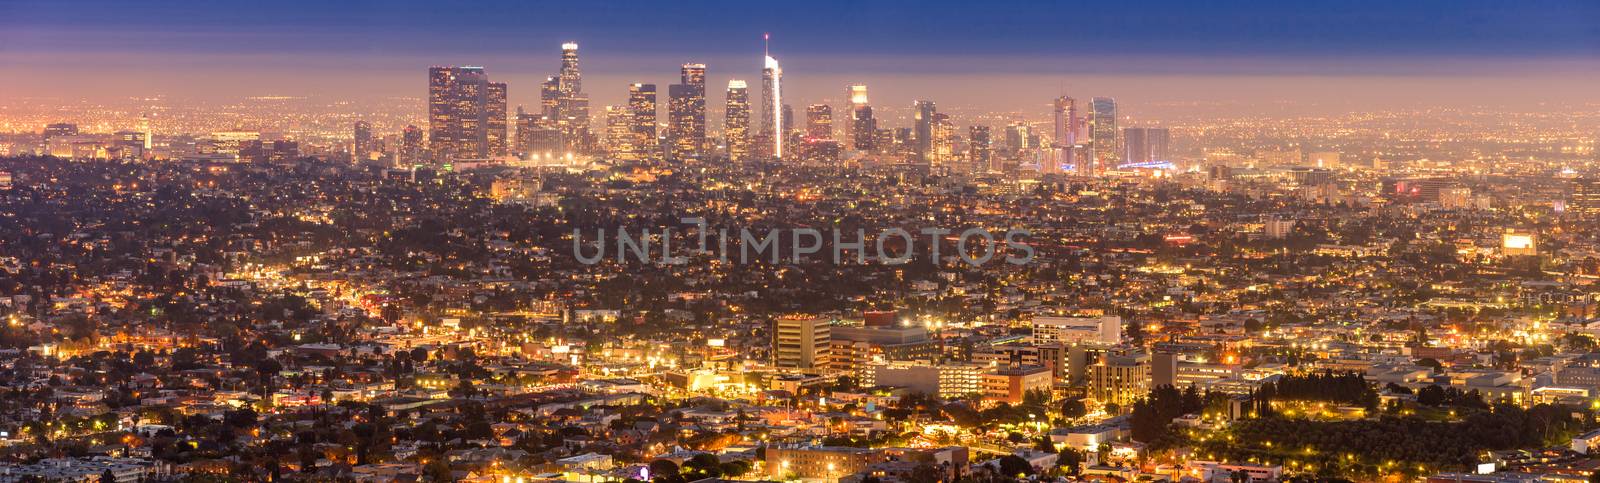 Los Angeles Downtown sunset by vichie81